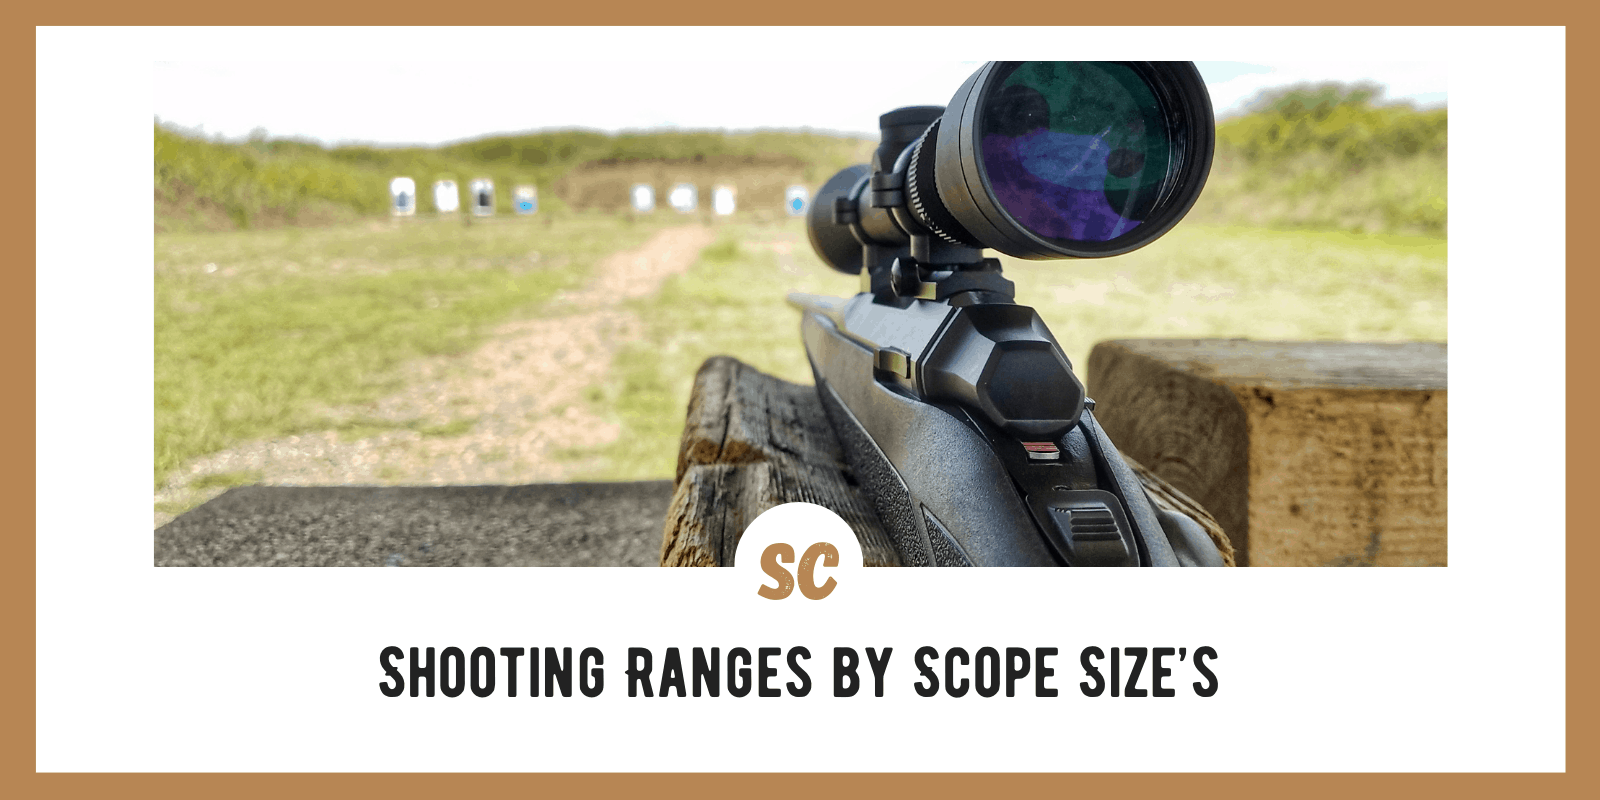 Shooting Ranges by Scope Size’s: Expert Insights